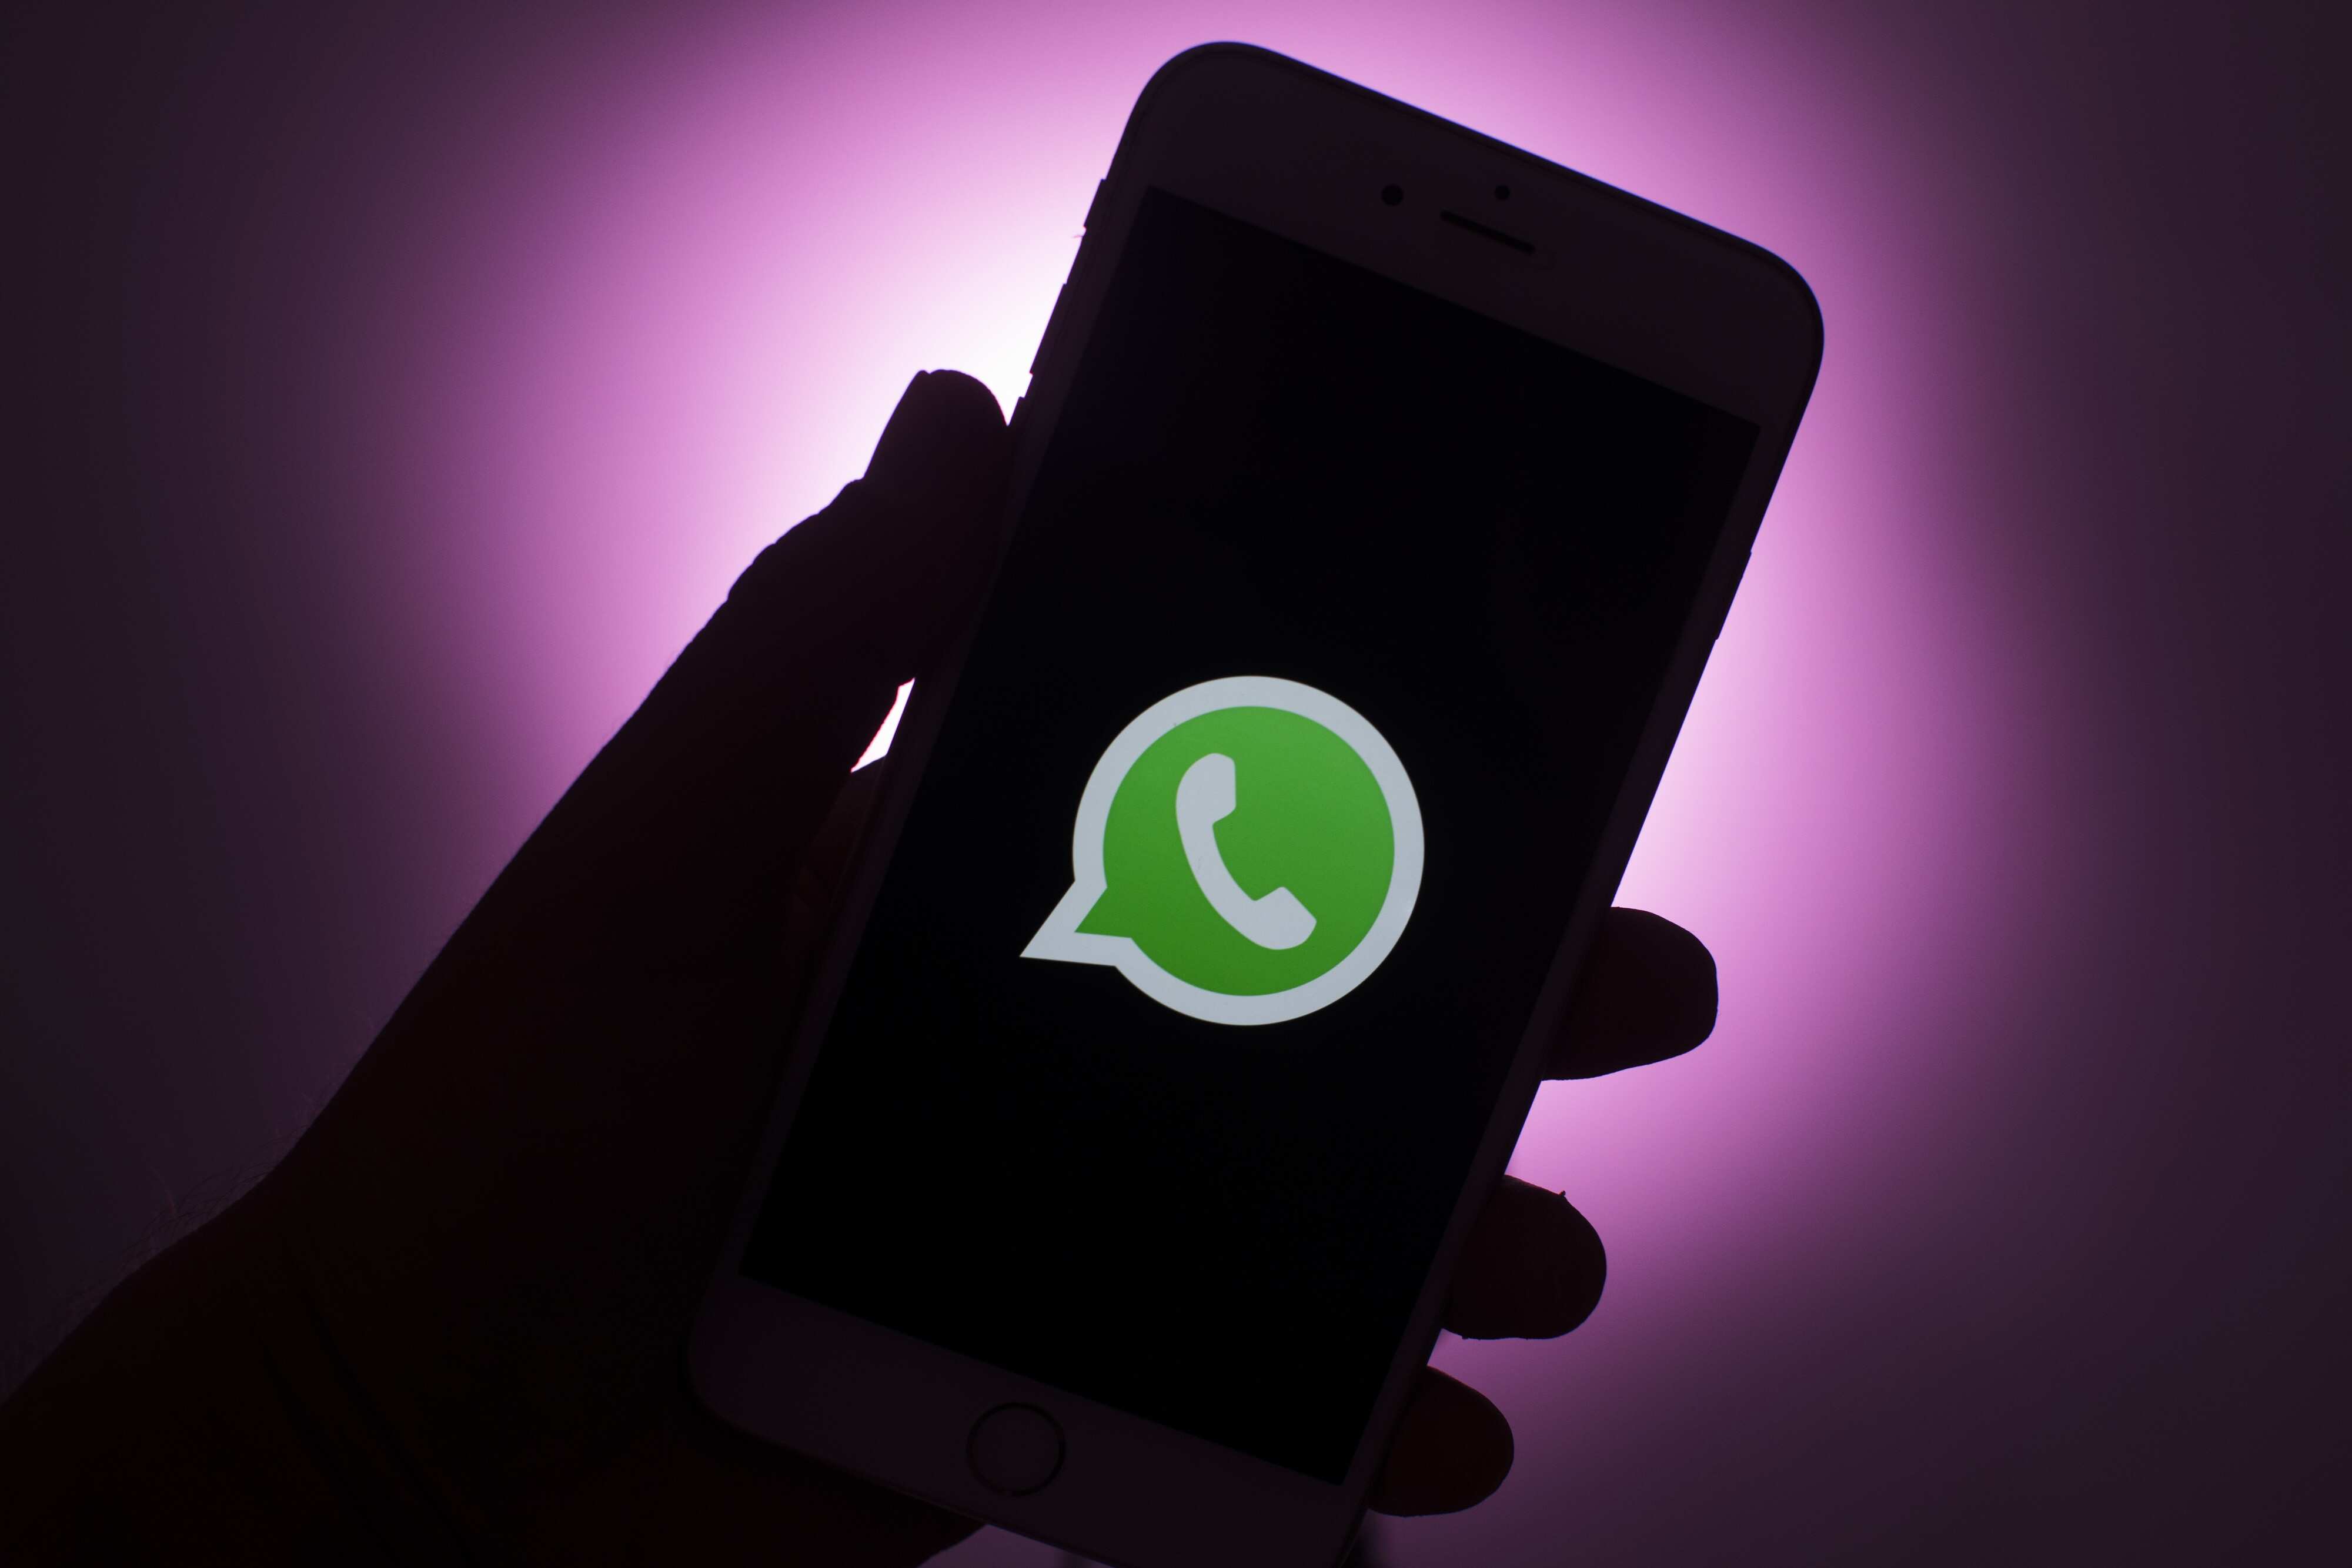 Switching between iOS and Android is going to get a lot easier for WhatsApp users.